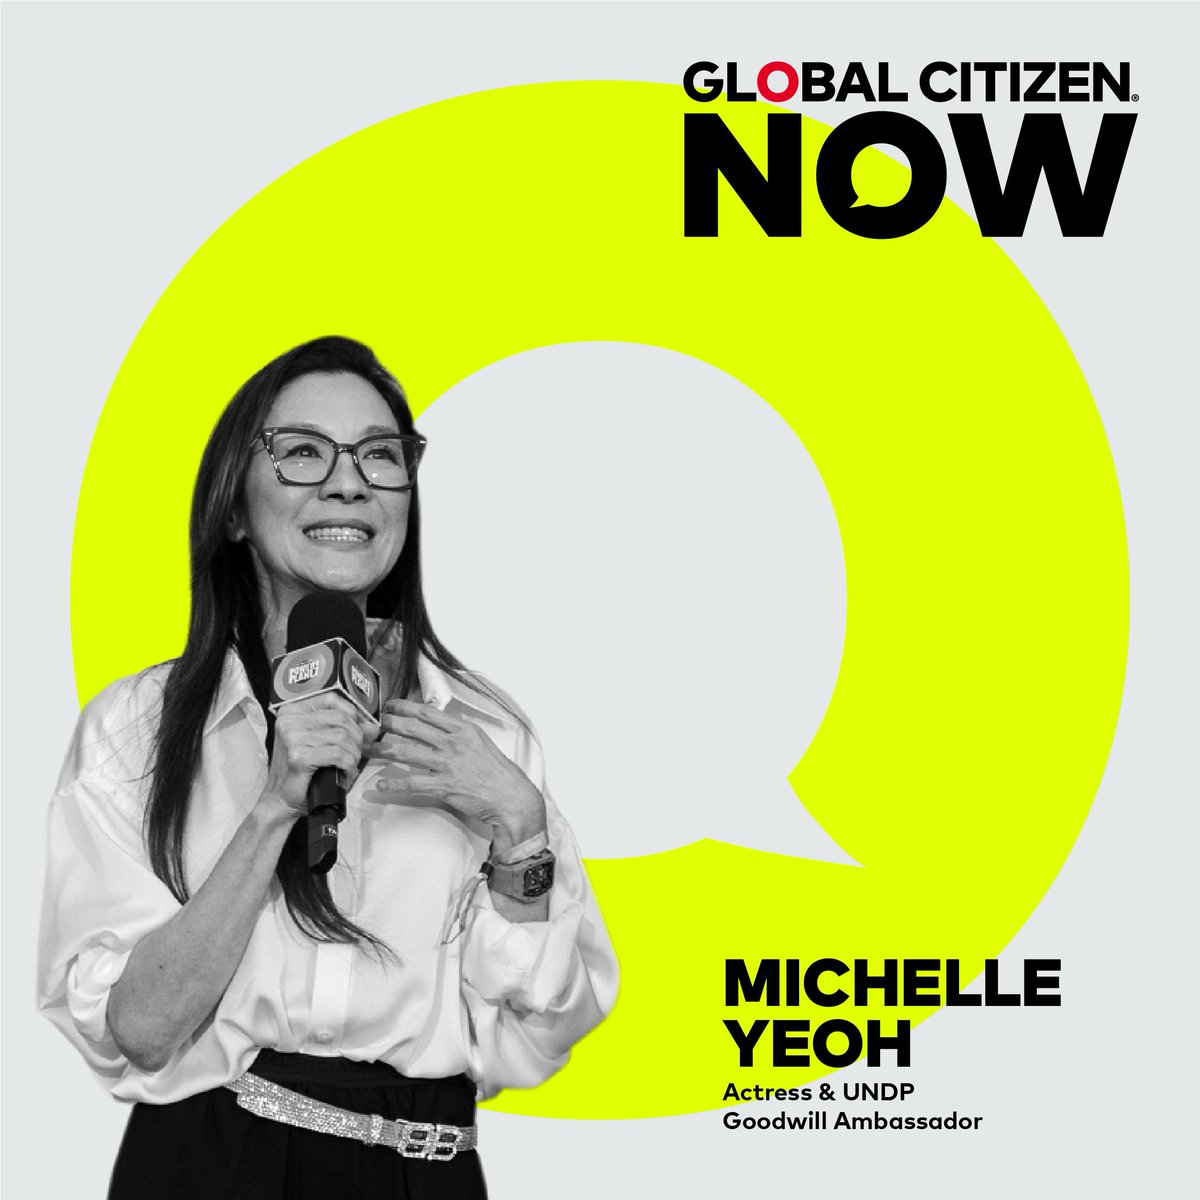 Our Goodwill Ambassador #MichelleYeoh will be at #GlobalCitizenNOW to join in conversation about how we can drive action to end extreme poverty & YOU can join in too. Learn more about @glblctzn’s action summit & bookmark the website to watch on May 1-2: glblctzn.co/e/GC-NOW-24